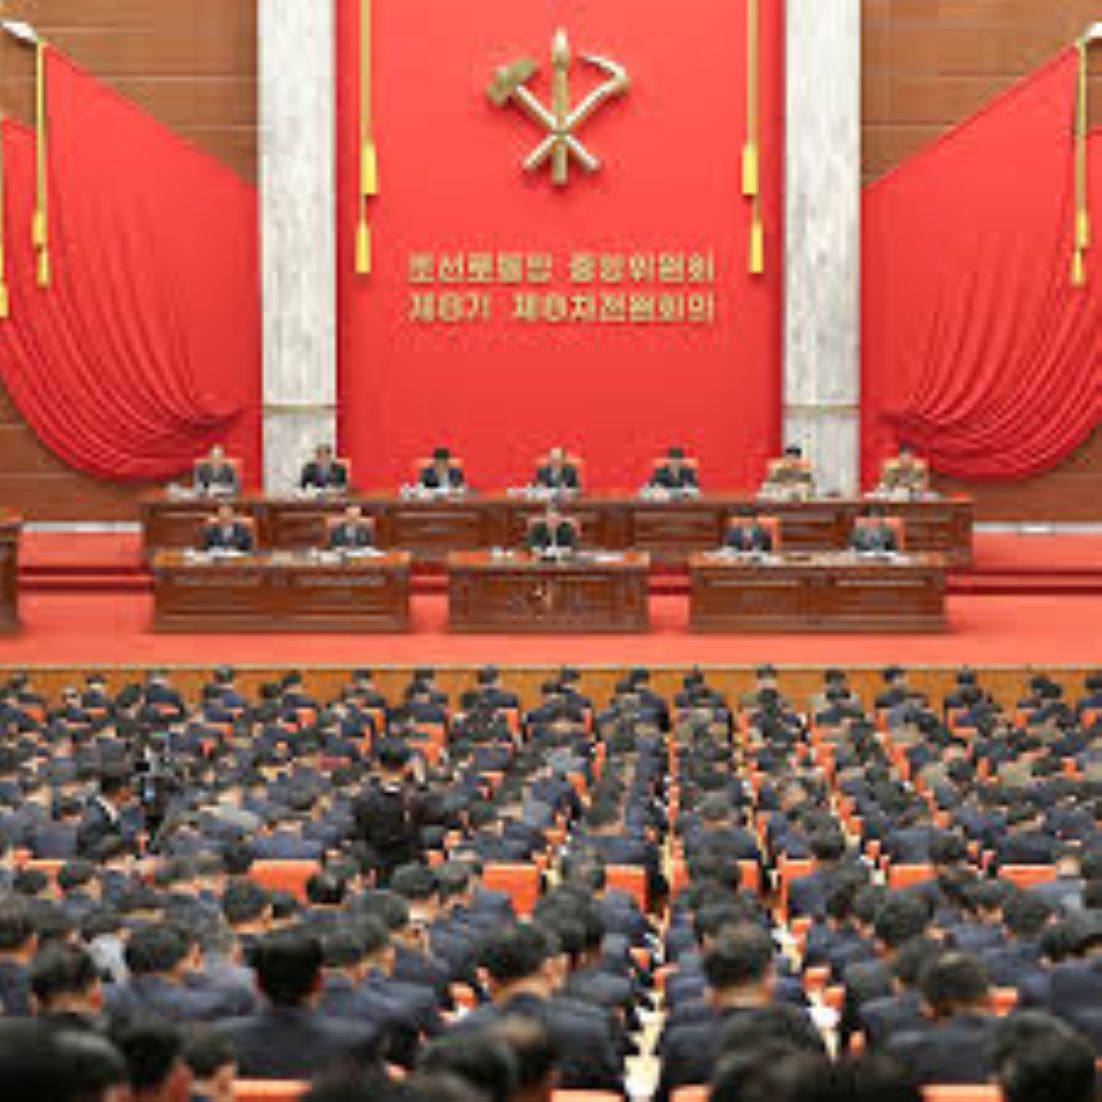 DPRK Ruling Party Convened Key Mid-Year Meeting